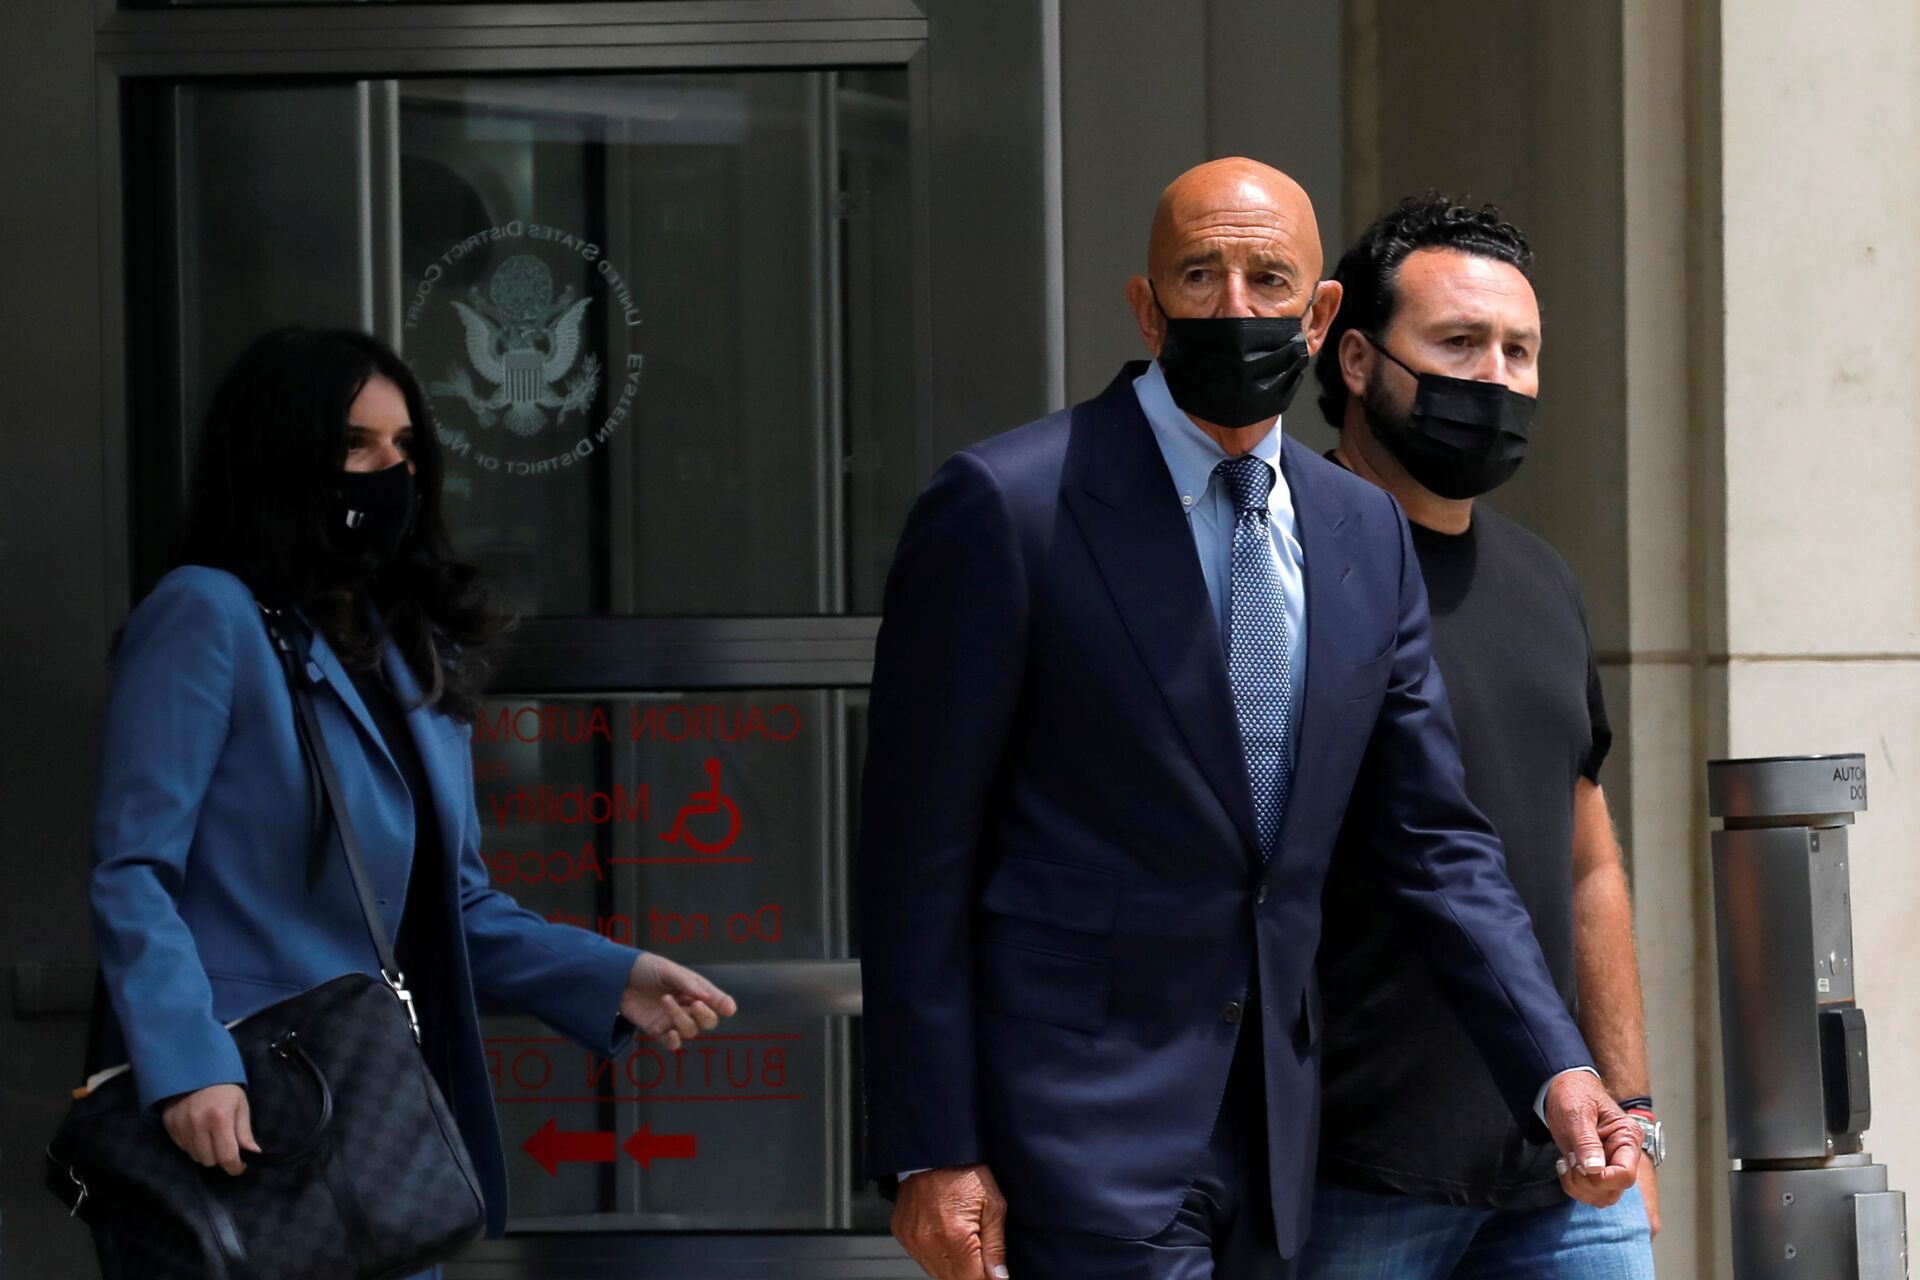 Thomas Barrack, a billionaire friend of Donald Trump who chaired the former president's inaugural fund, exits following his arraignment hearing at the Brooklyn Federal Courthouse in Brooklyn, New York, U.S., July 26, 2021. - Sputnik International, 1920, 07.09.2021